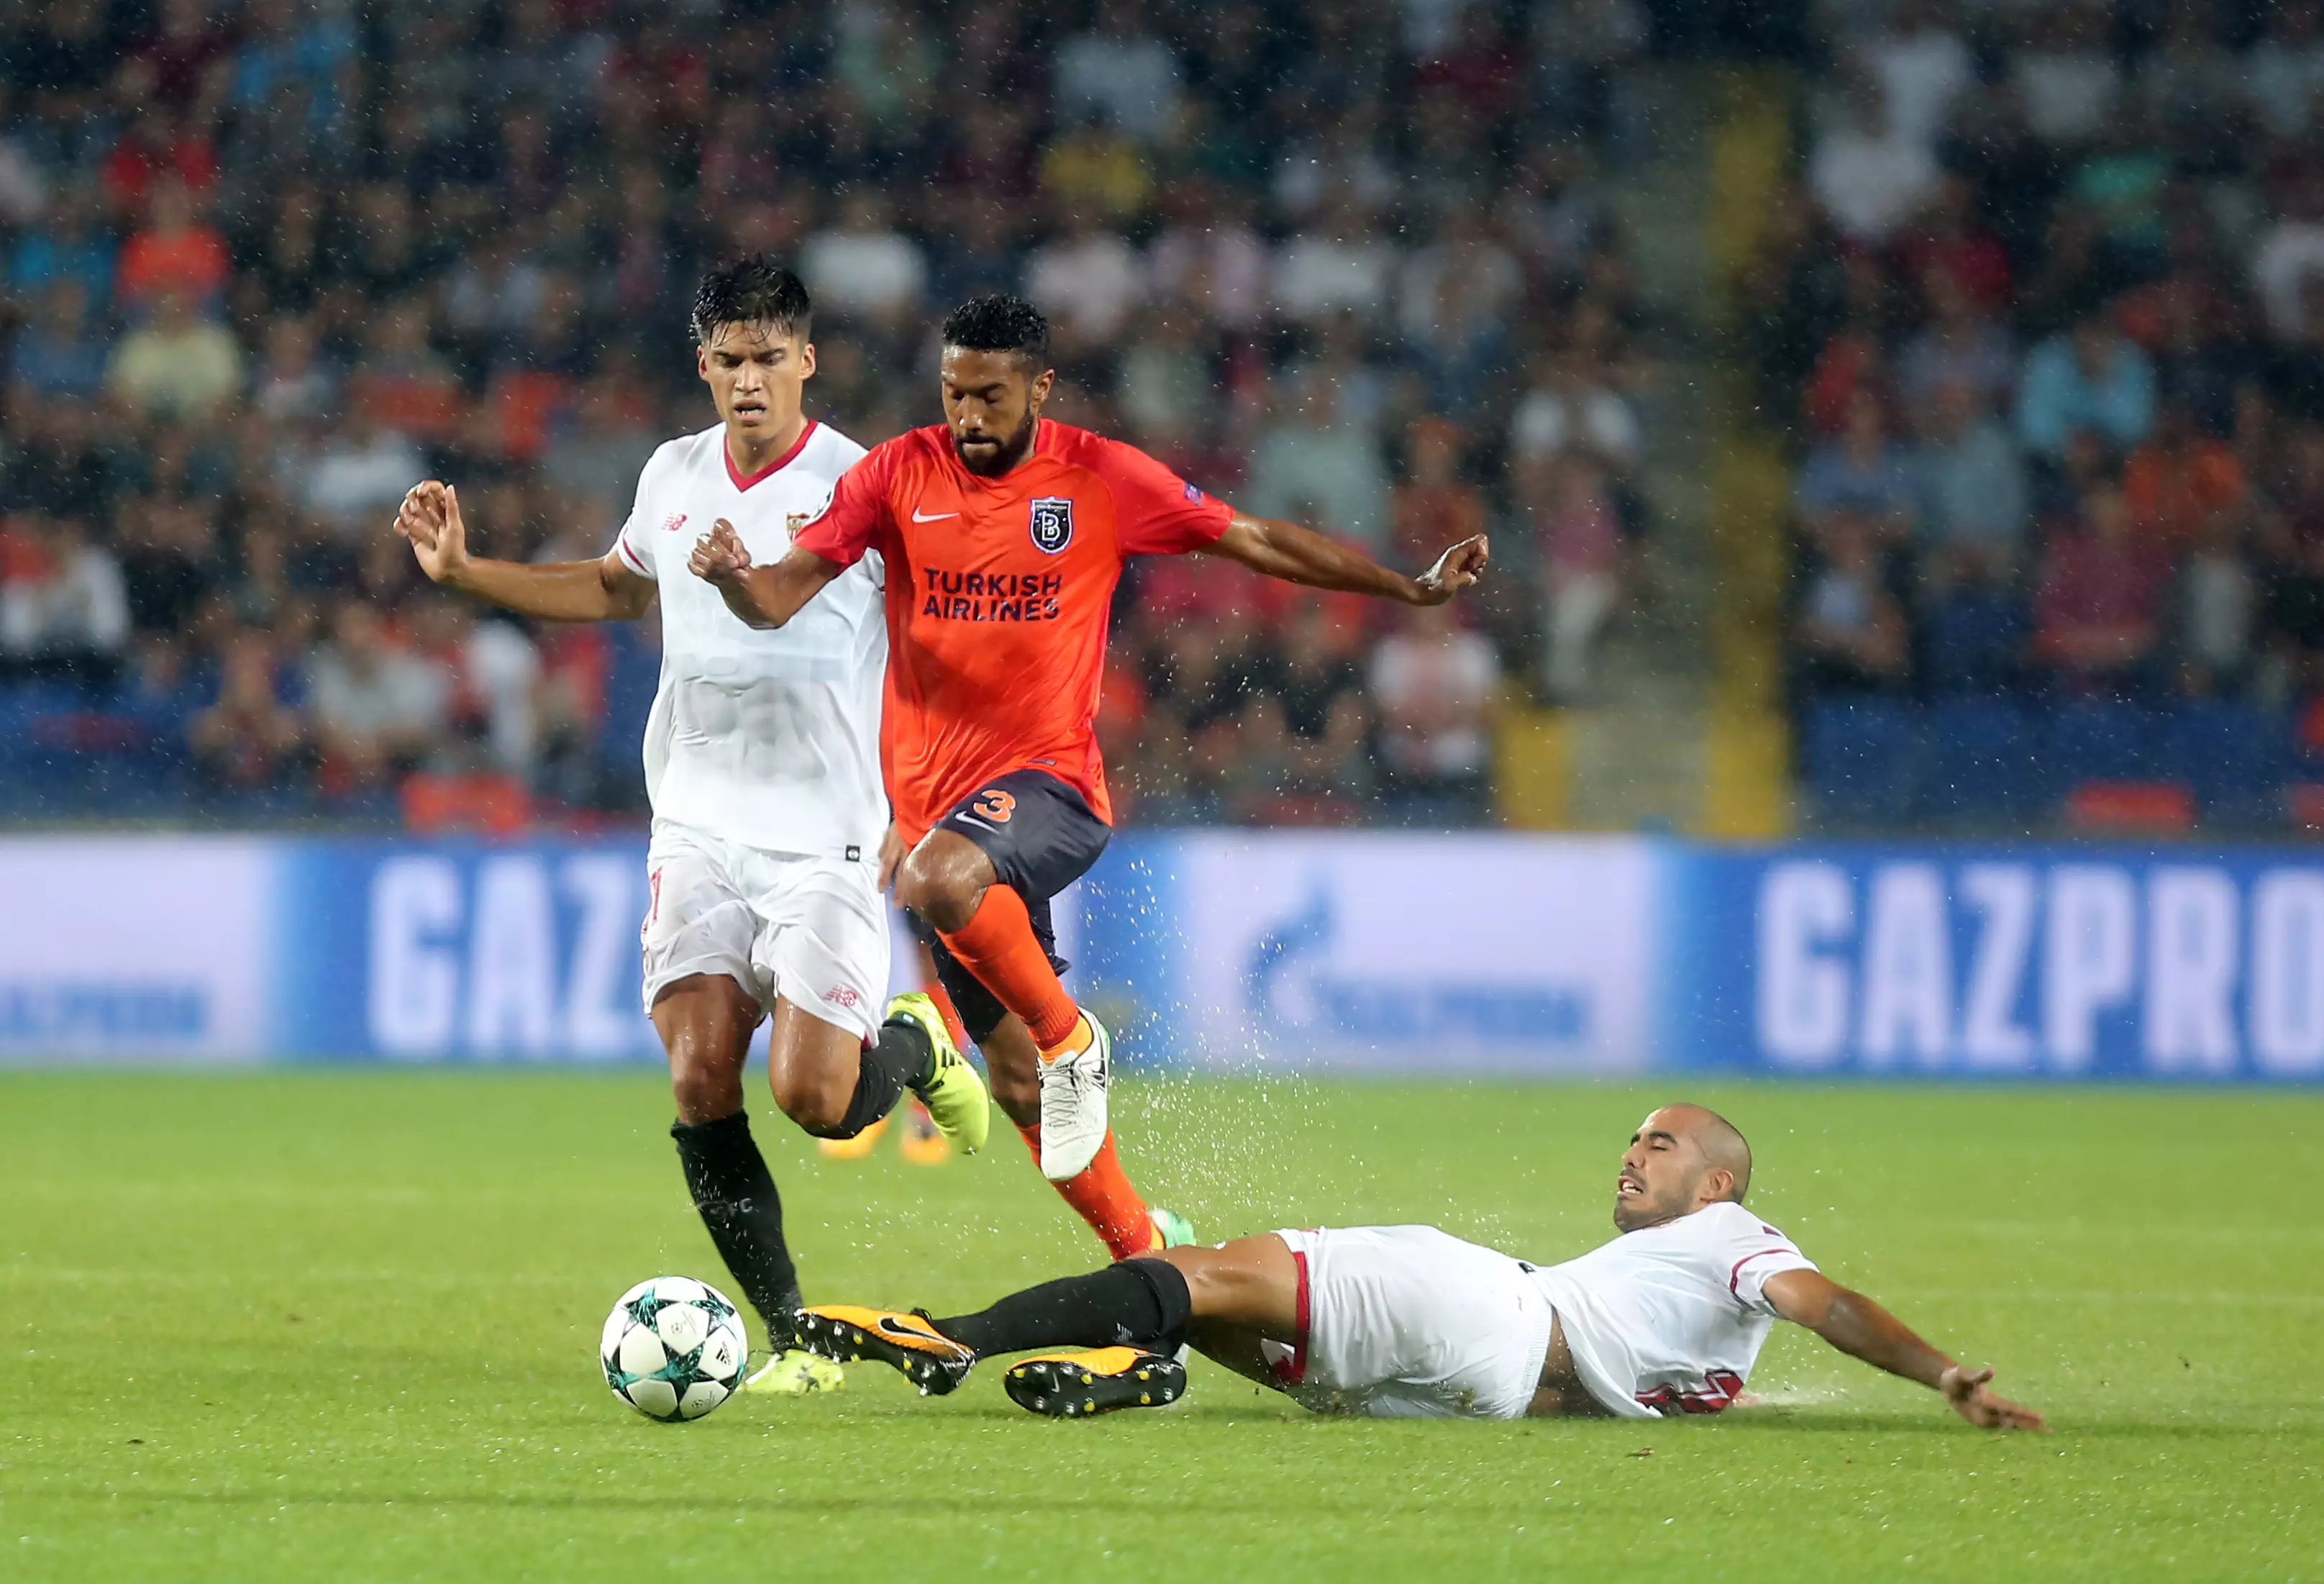 Clichy in action for Basaksehir. Image: PA